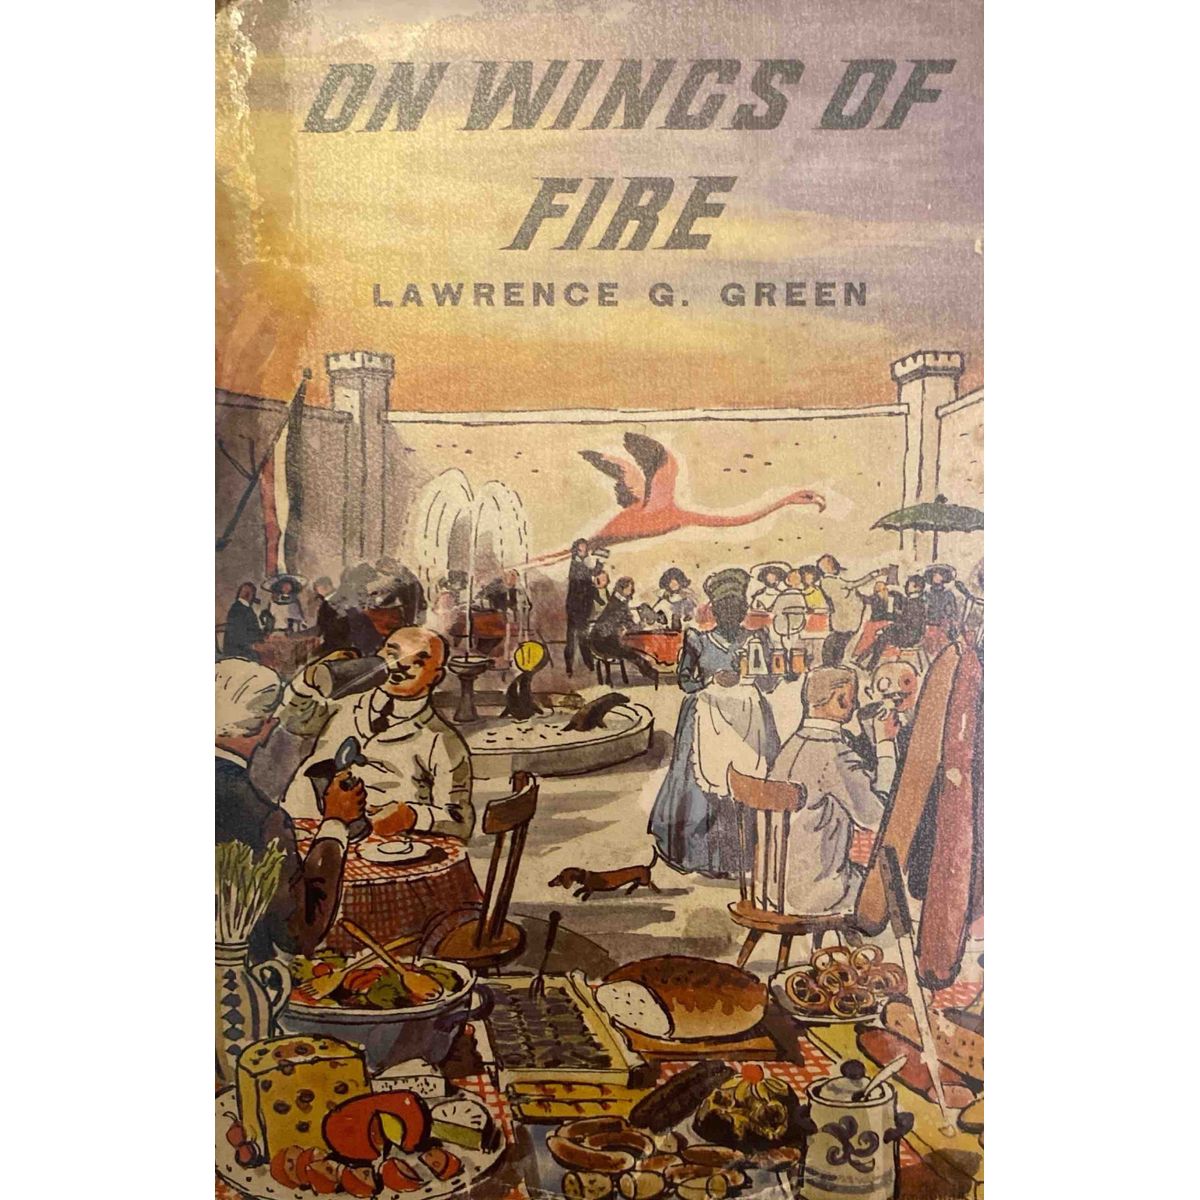 On Wings of Fire - A Narrative of Odd and Unusual Characters and Queer, Remote Places Along the Flamingo Coast from Swakopmund to the Cape by Lawrence G. Green, 1st Edition [1967]